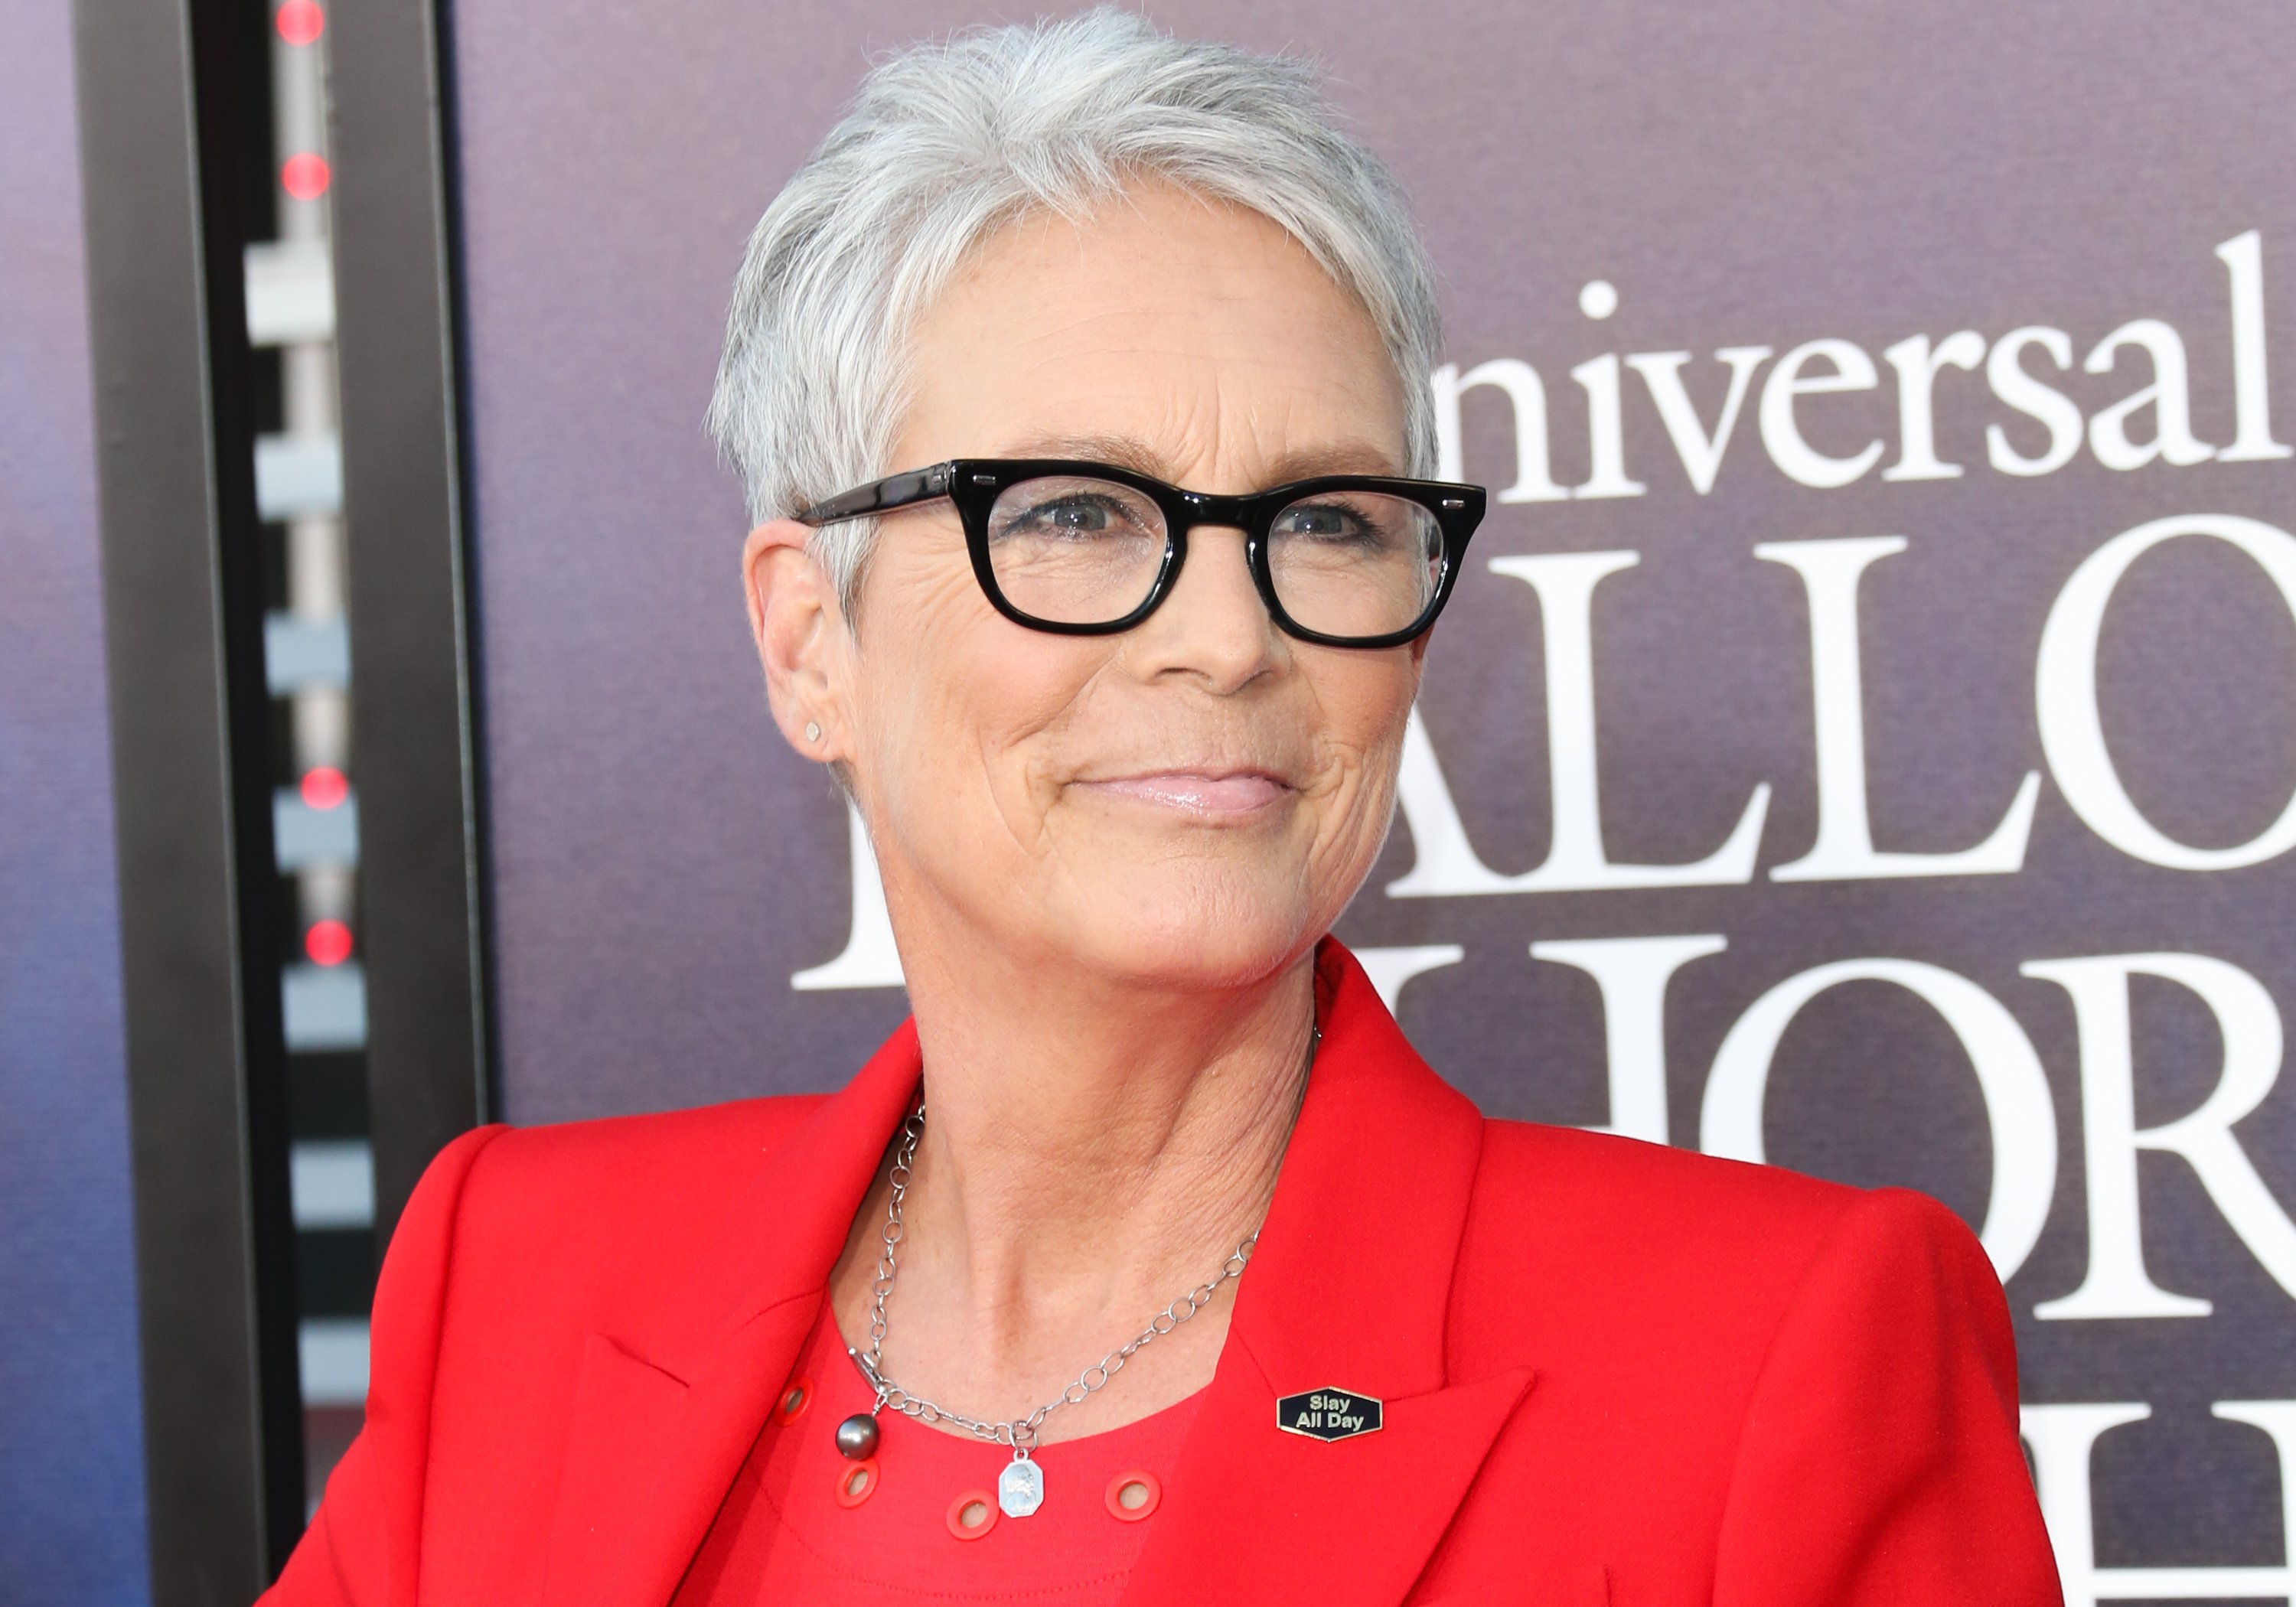 Jamie Lee Curtis attends the opening night celebration of "Halloween Horror Nights" at Universal Studios CityWalk Cinemas on September 14, 2018, in Universal City, California. | Source: Getty Images